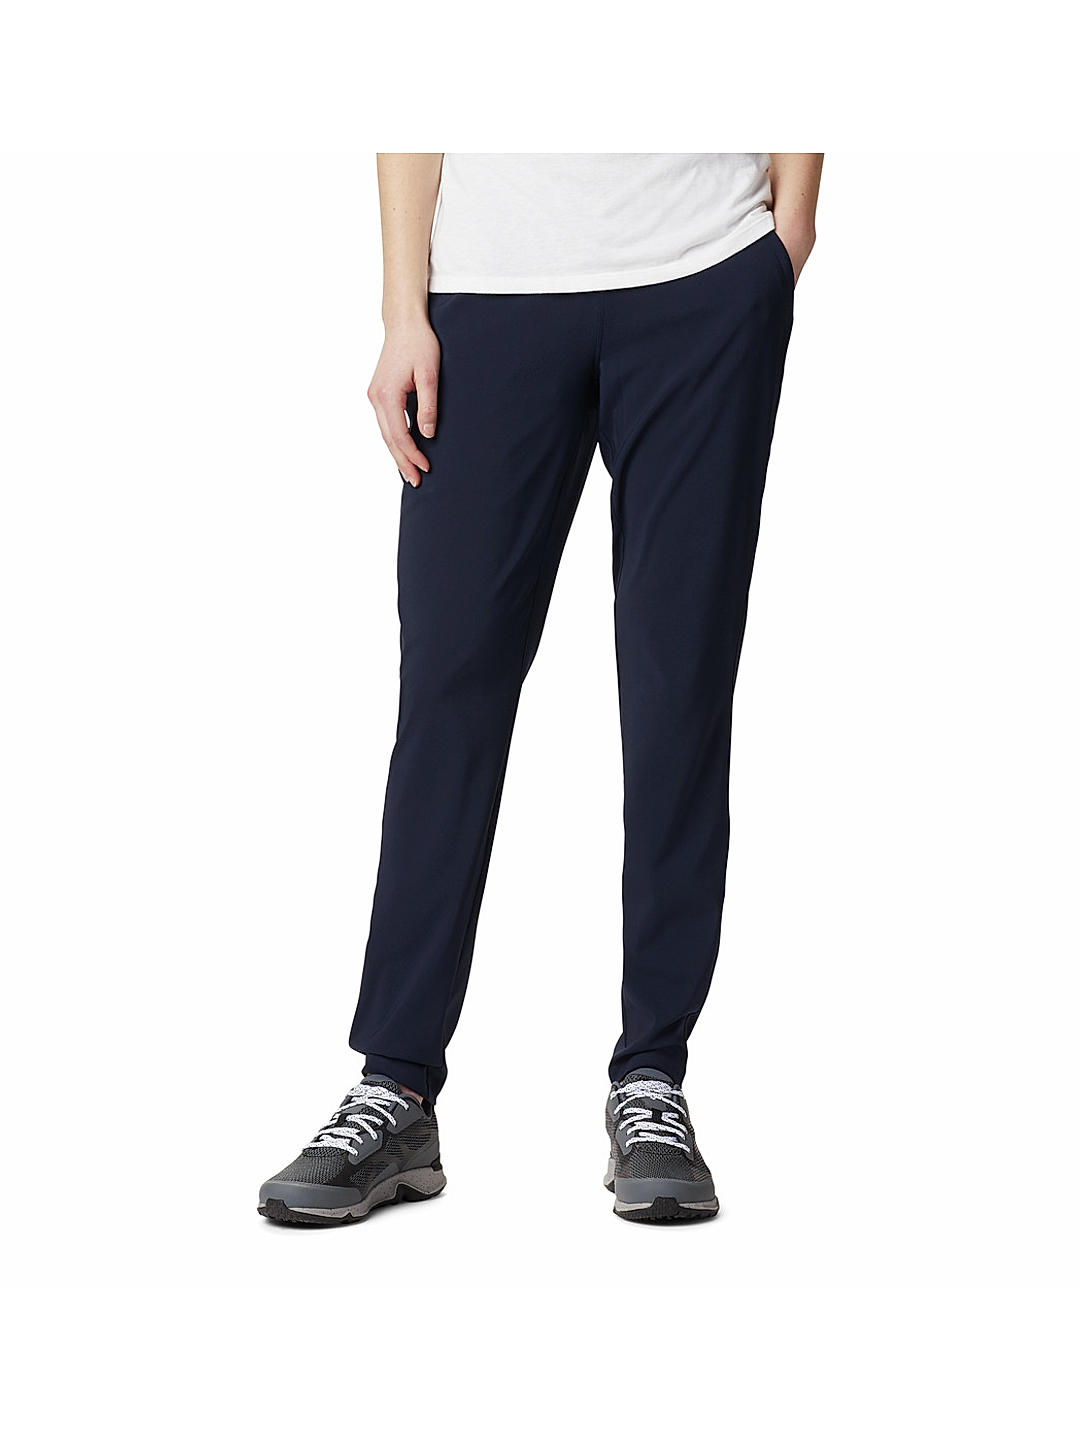 Amazon.com: Columbia Men's Tech Trail Knit Jogger, Collegiate Navy, X-Small  : Clothing, Shoes & Jewelry